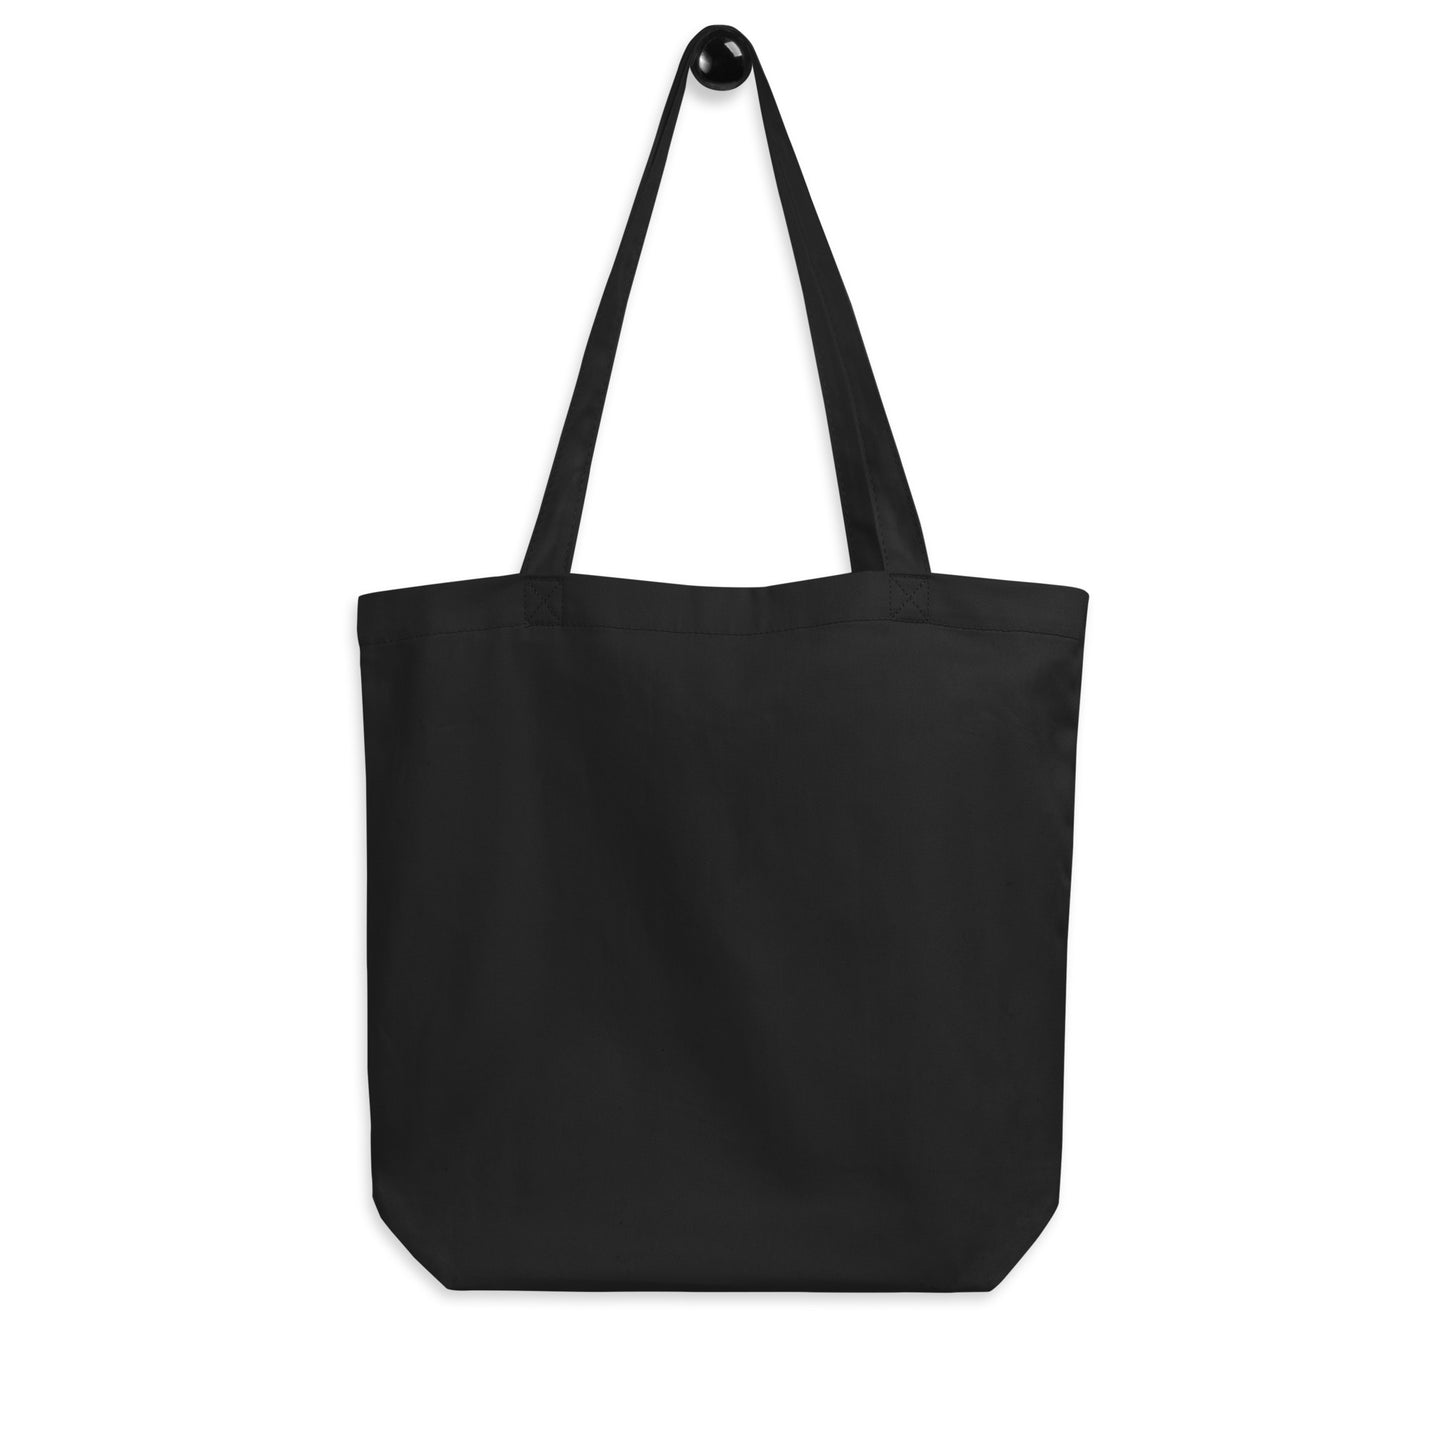 Unique Travel Gift Organic Tote - White Oval • BRU Brussels • YHM Designs - Image 05